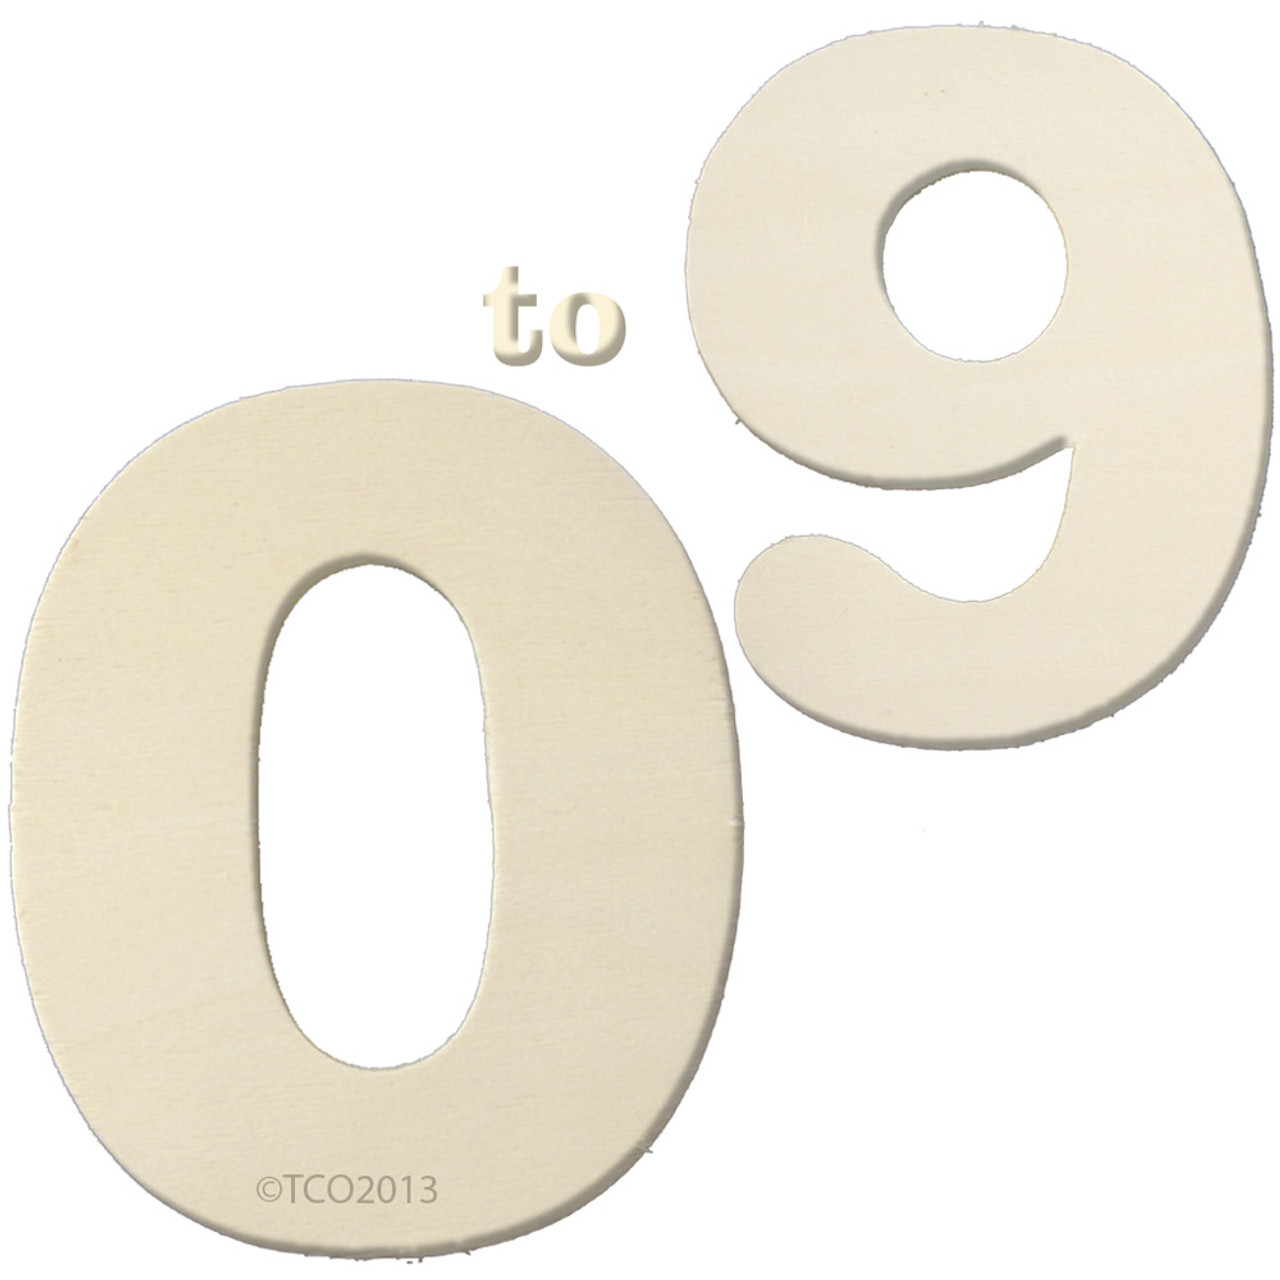 10” Wooden Numbers for Crafts 